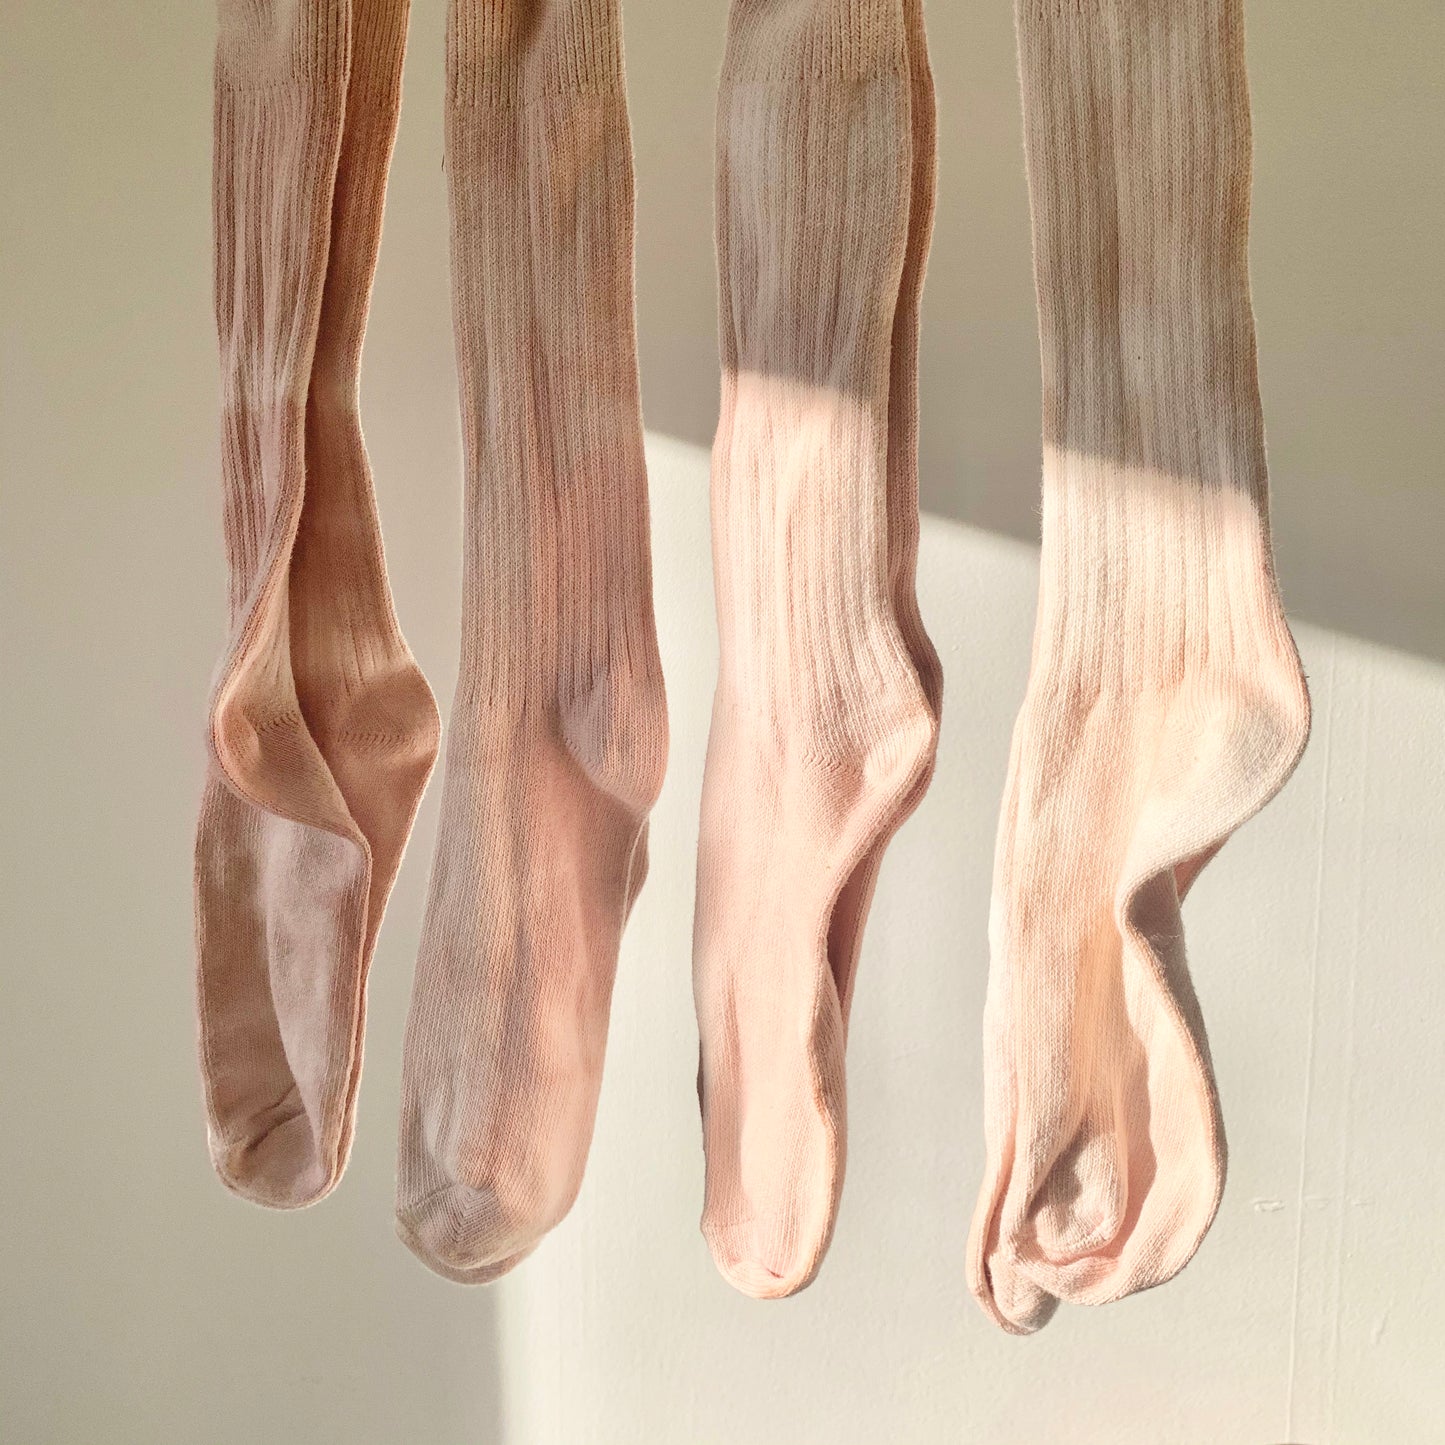 Avocado Dyed Socks in Parchment